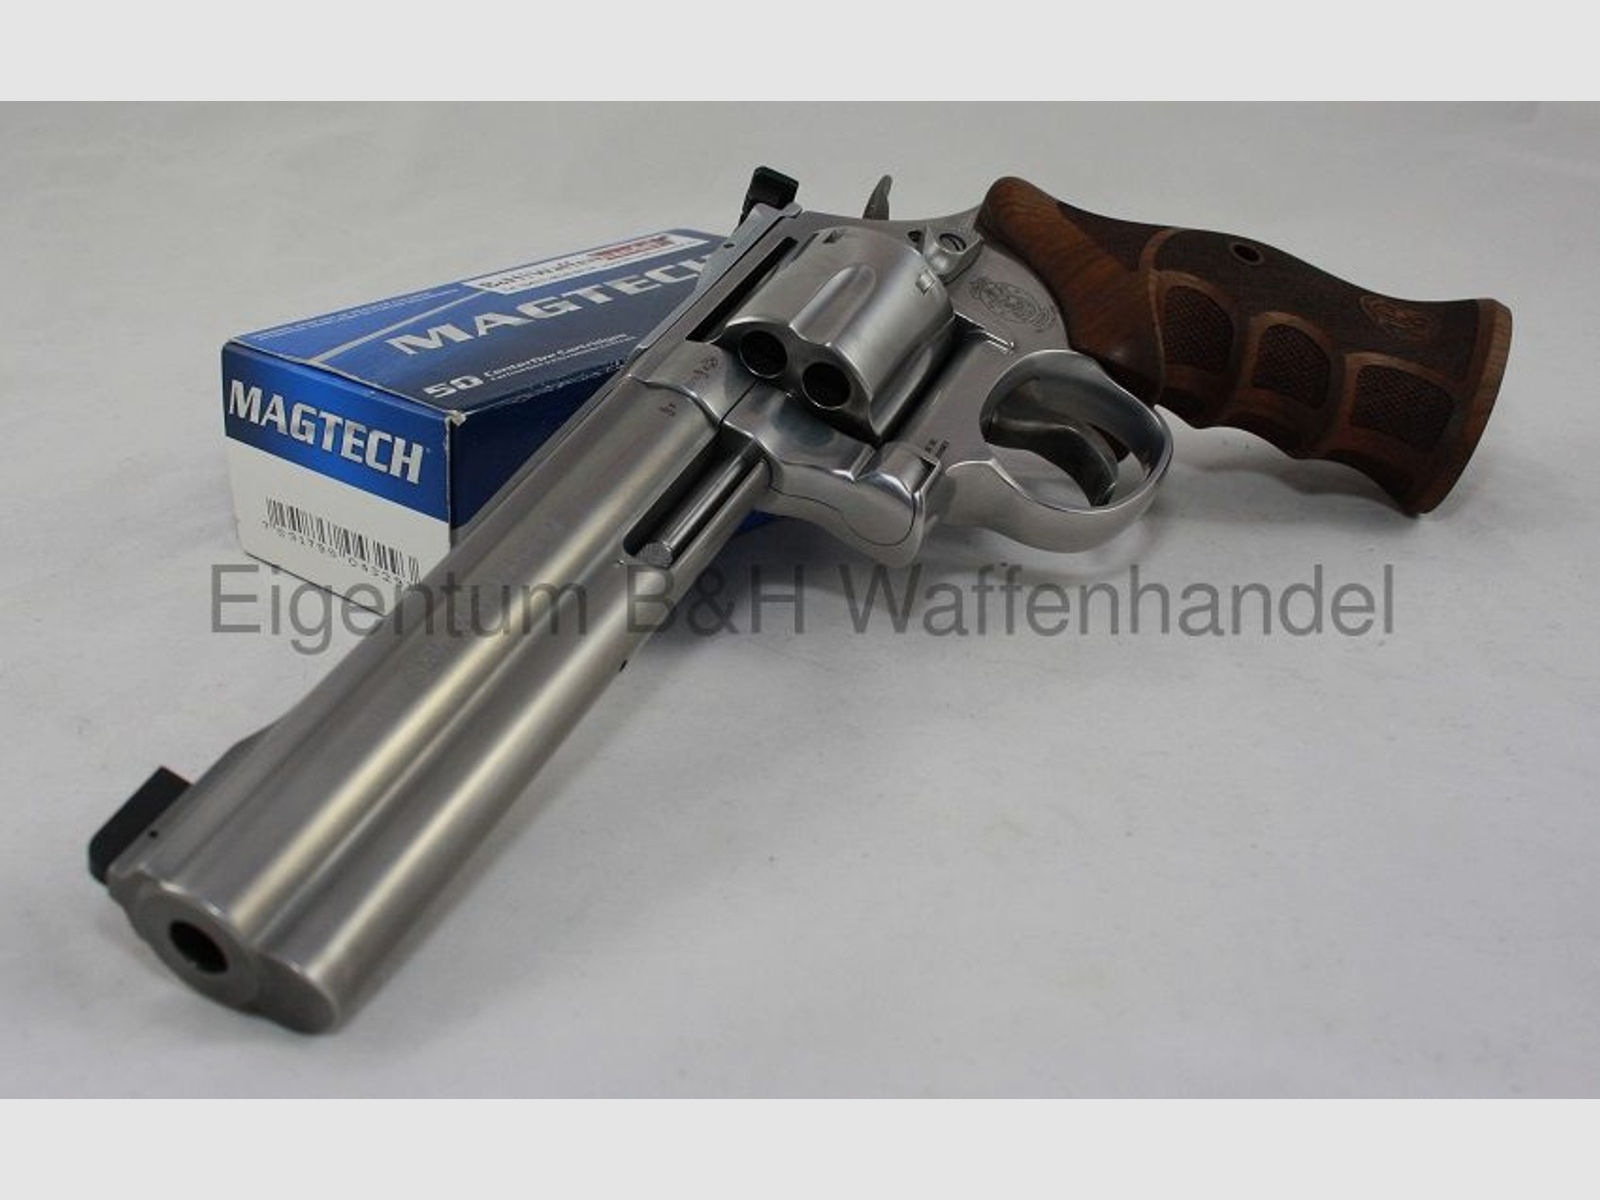 Smith & Wesson	 686 Target Champion Deluxe